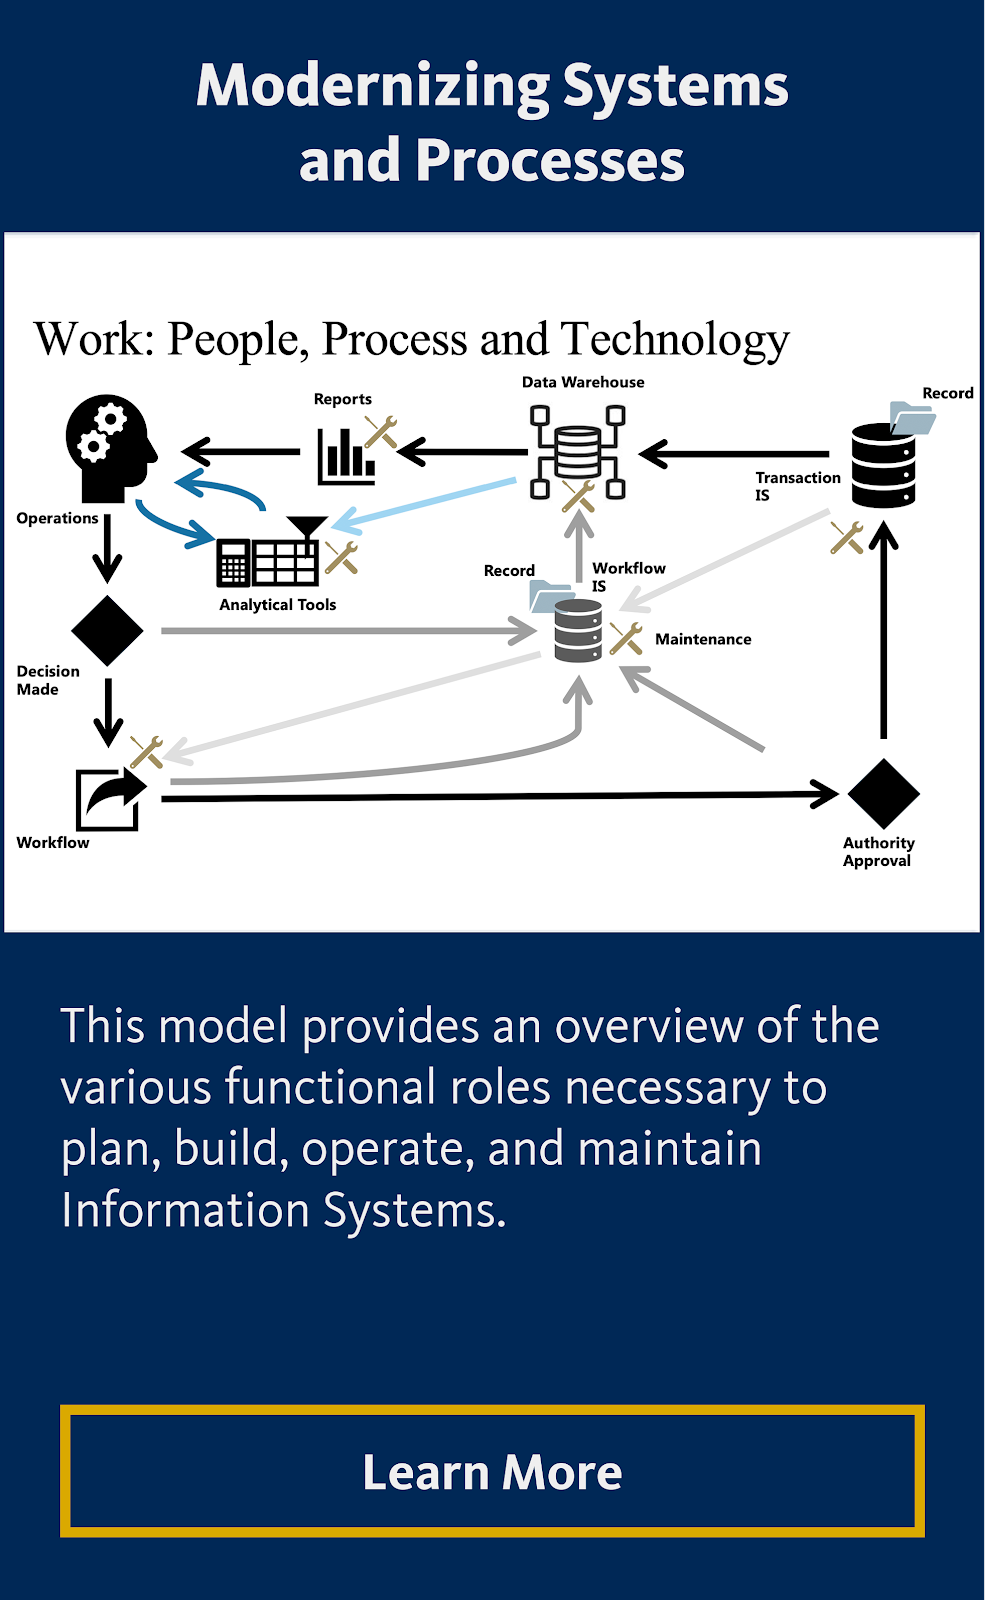 Modernizing Systems and Processes